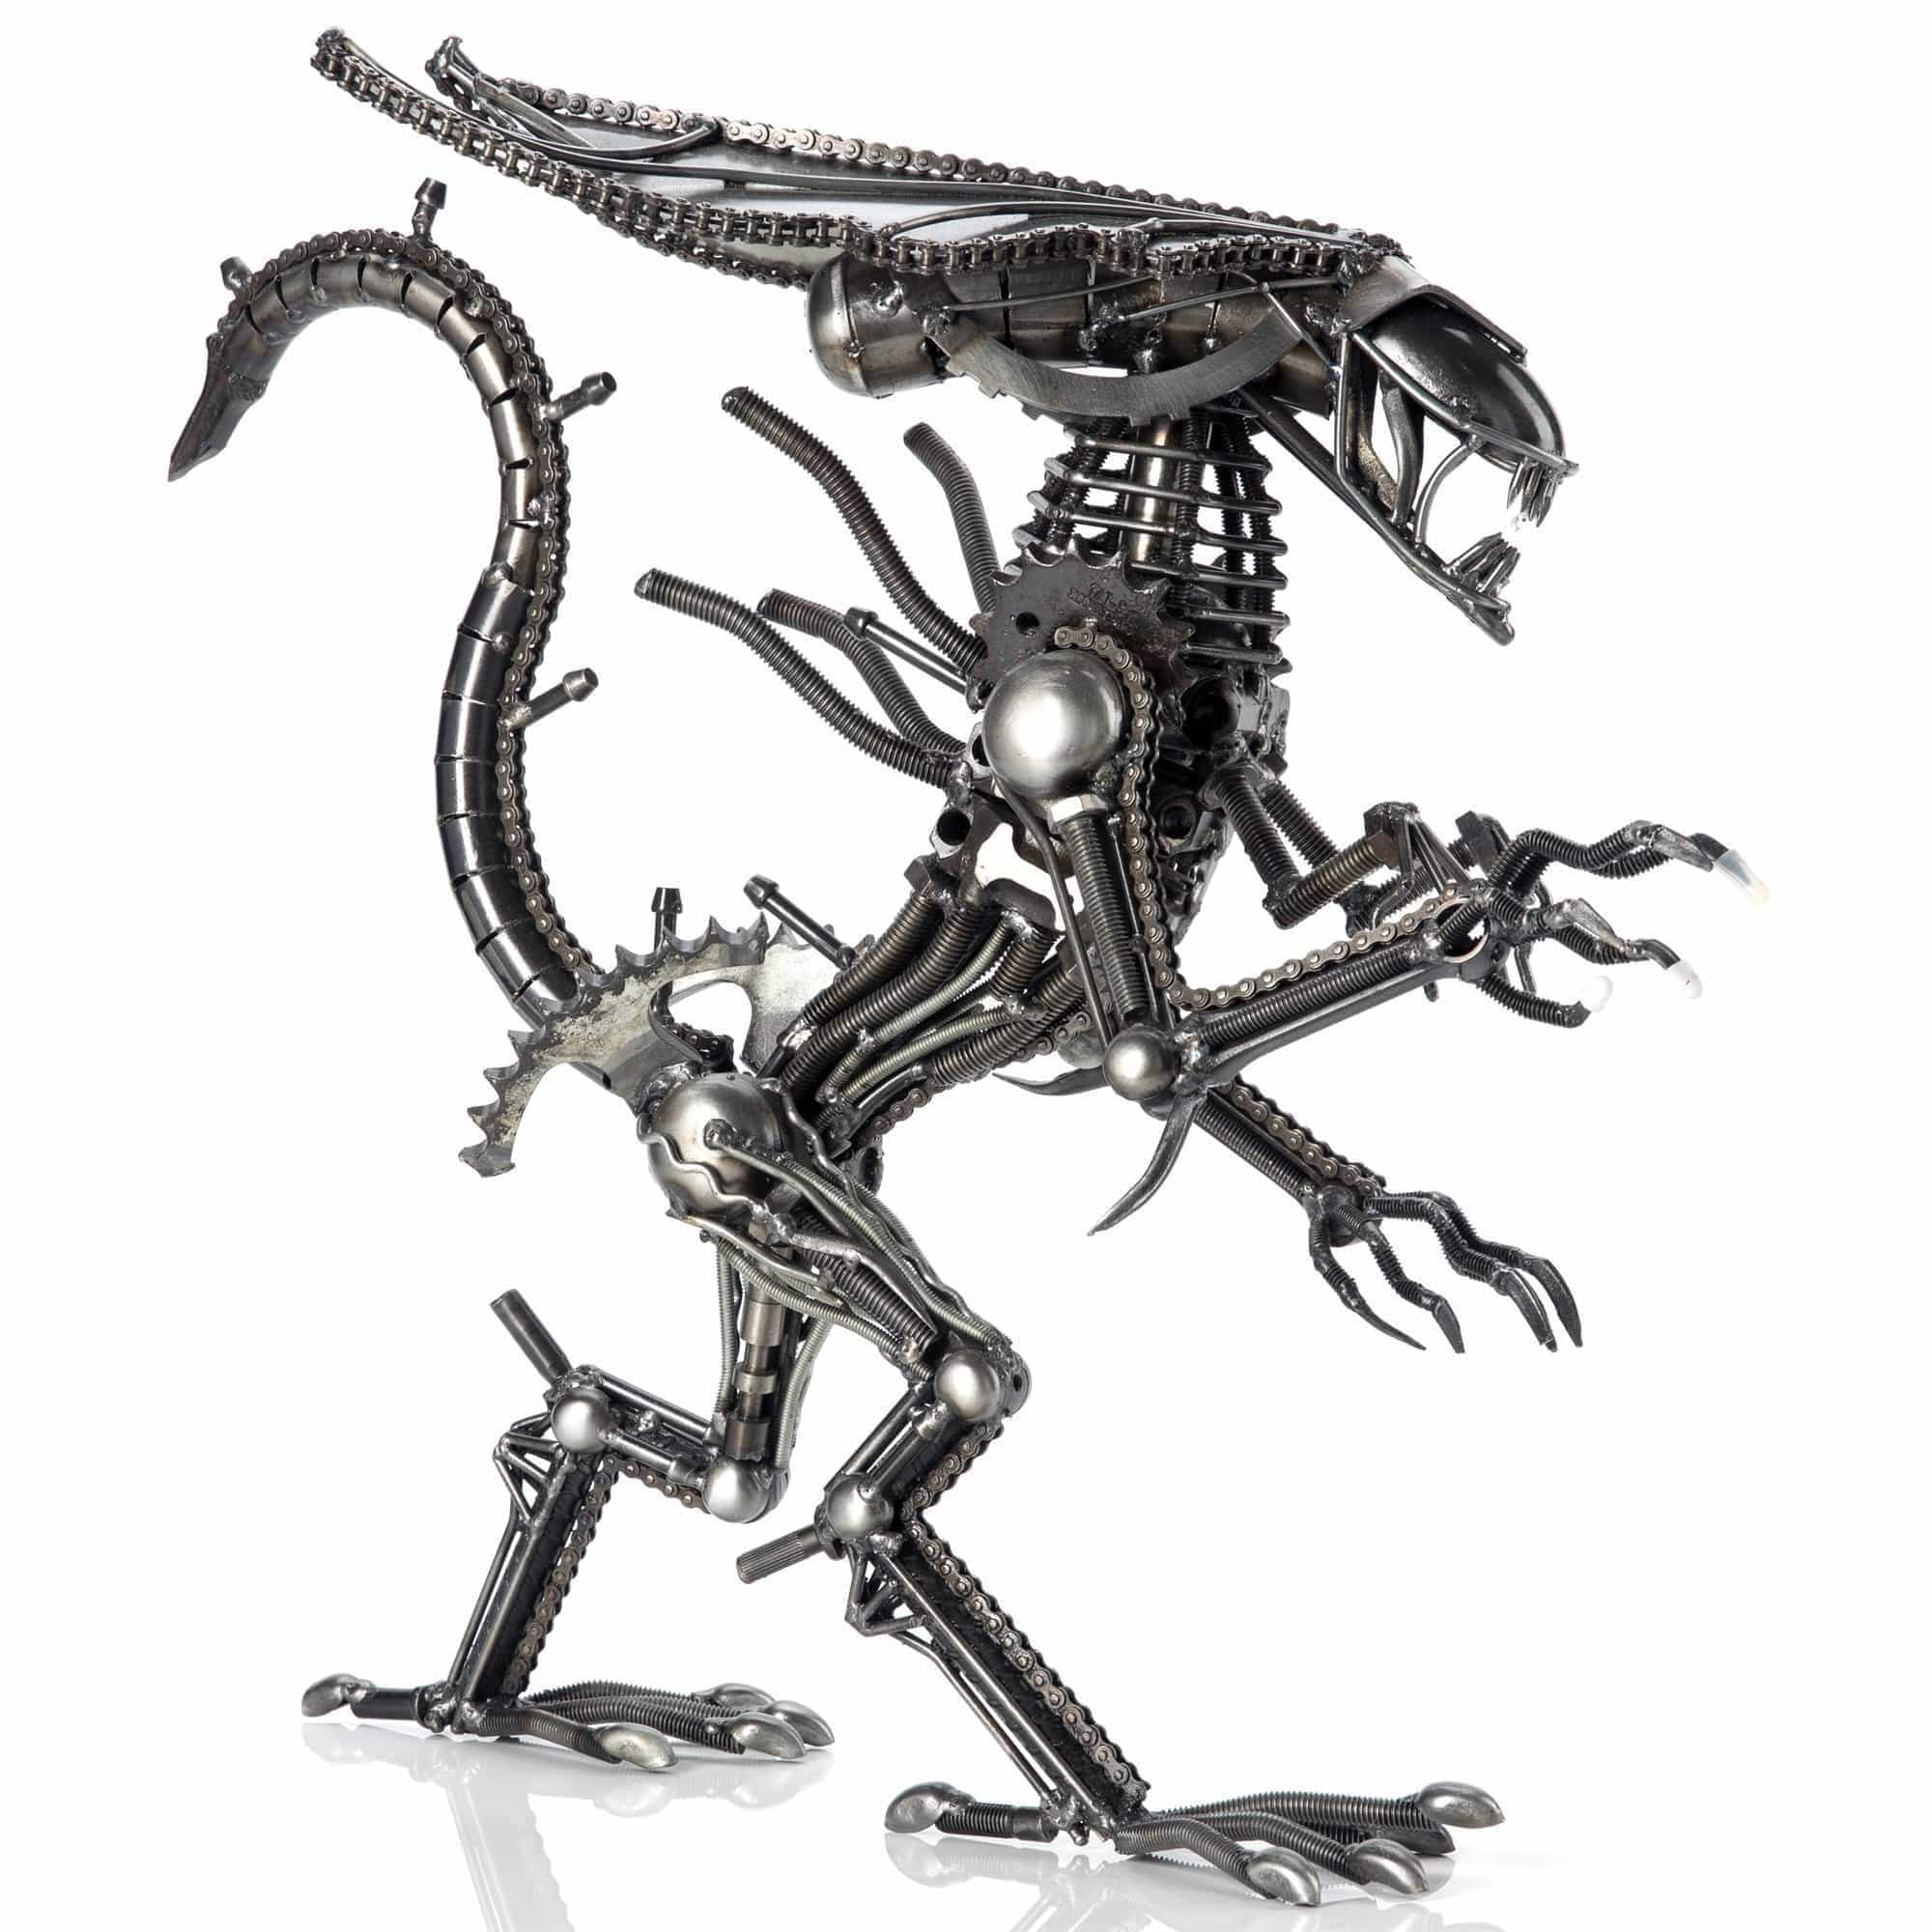 Kalifano Recycled Metal Art 18" Queen Alien Inspired Recycled Metal Sculpture RMS-QA45x40-S